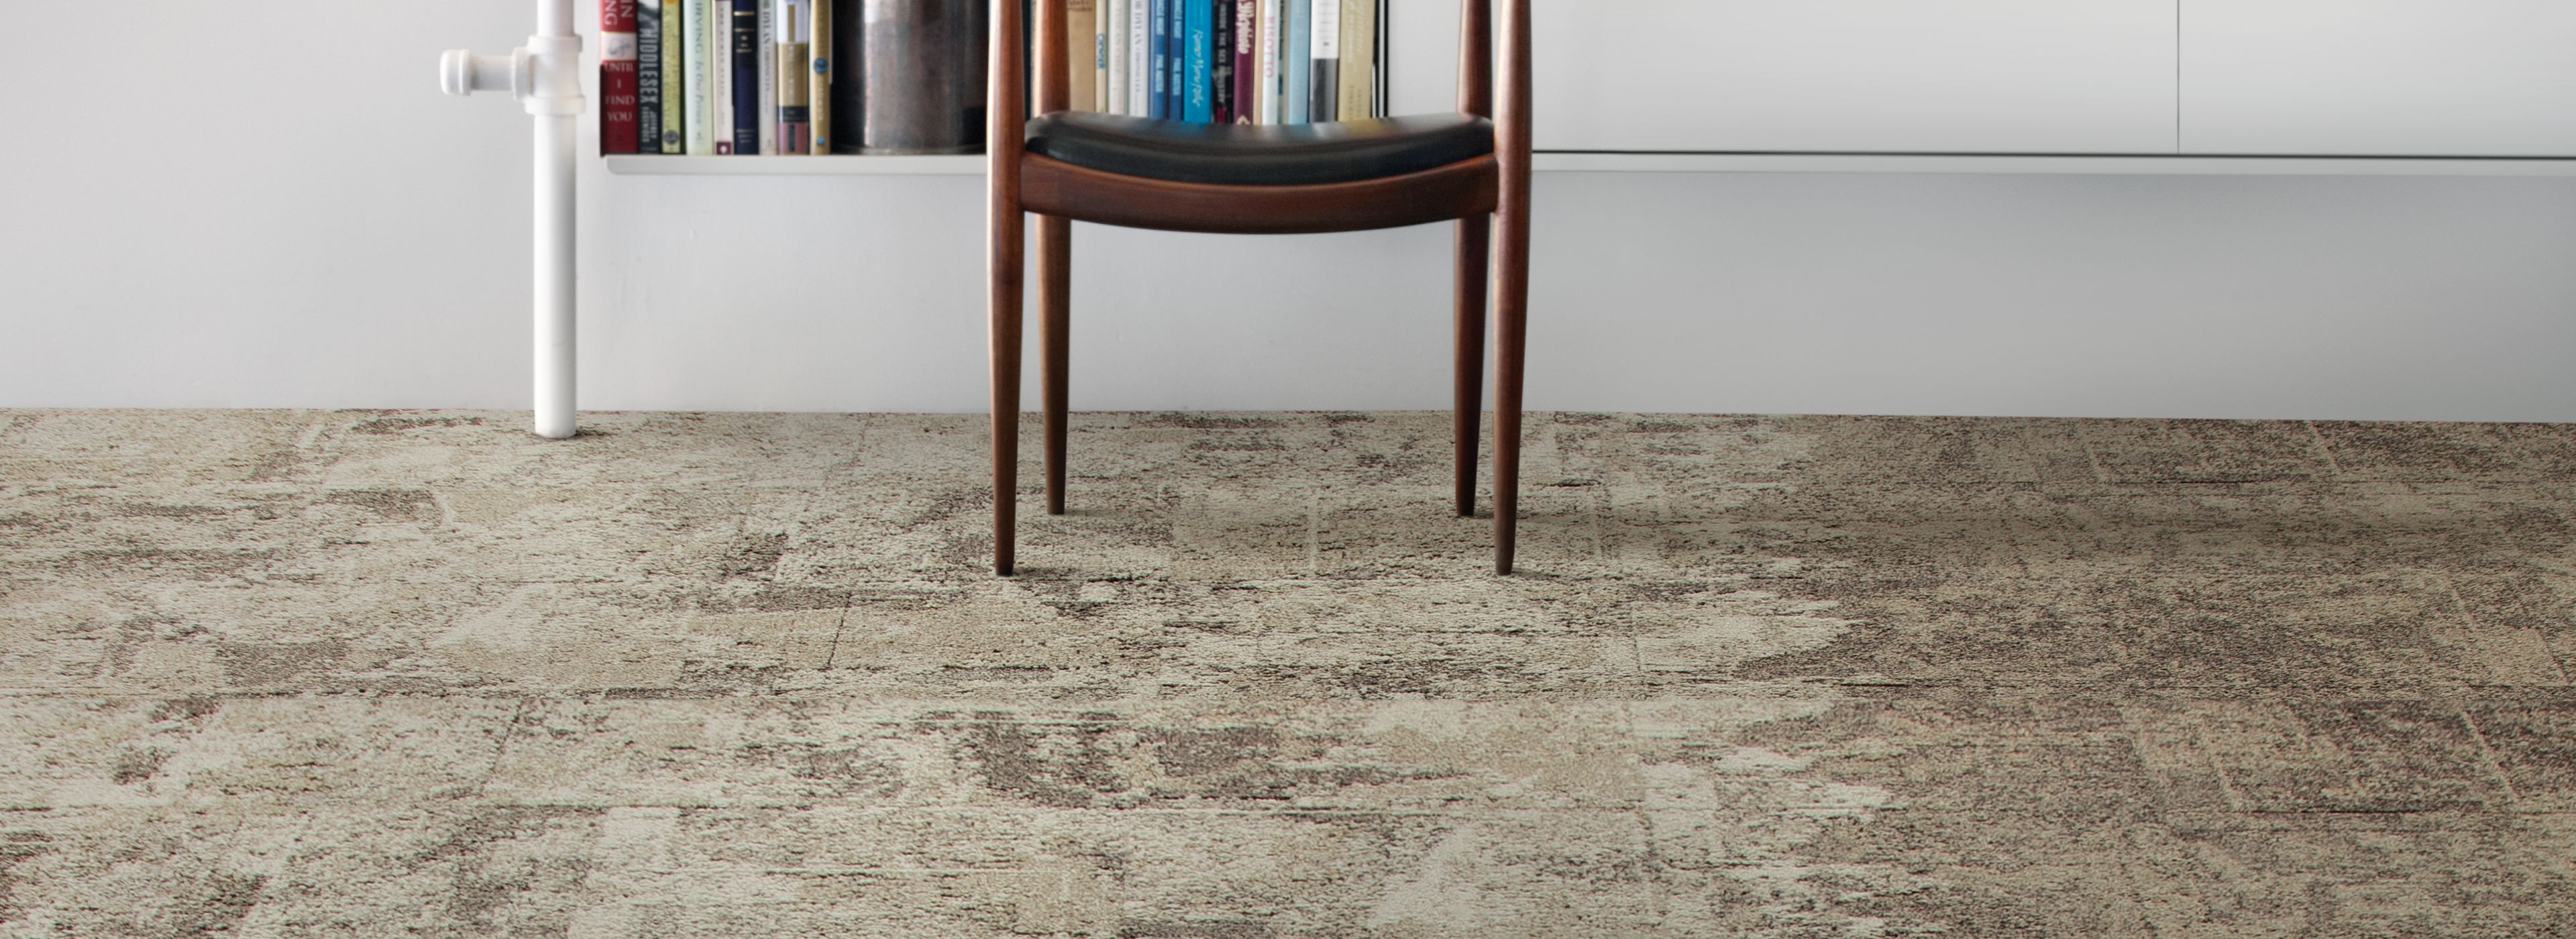 Interface B601, B602 and B603 carpet tile in library with wooden chair afbeeldingnummer 1